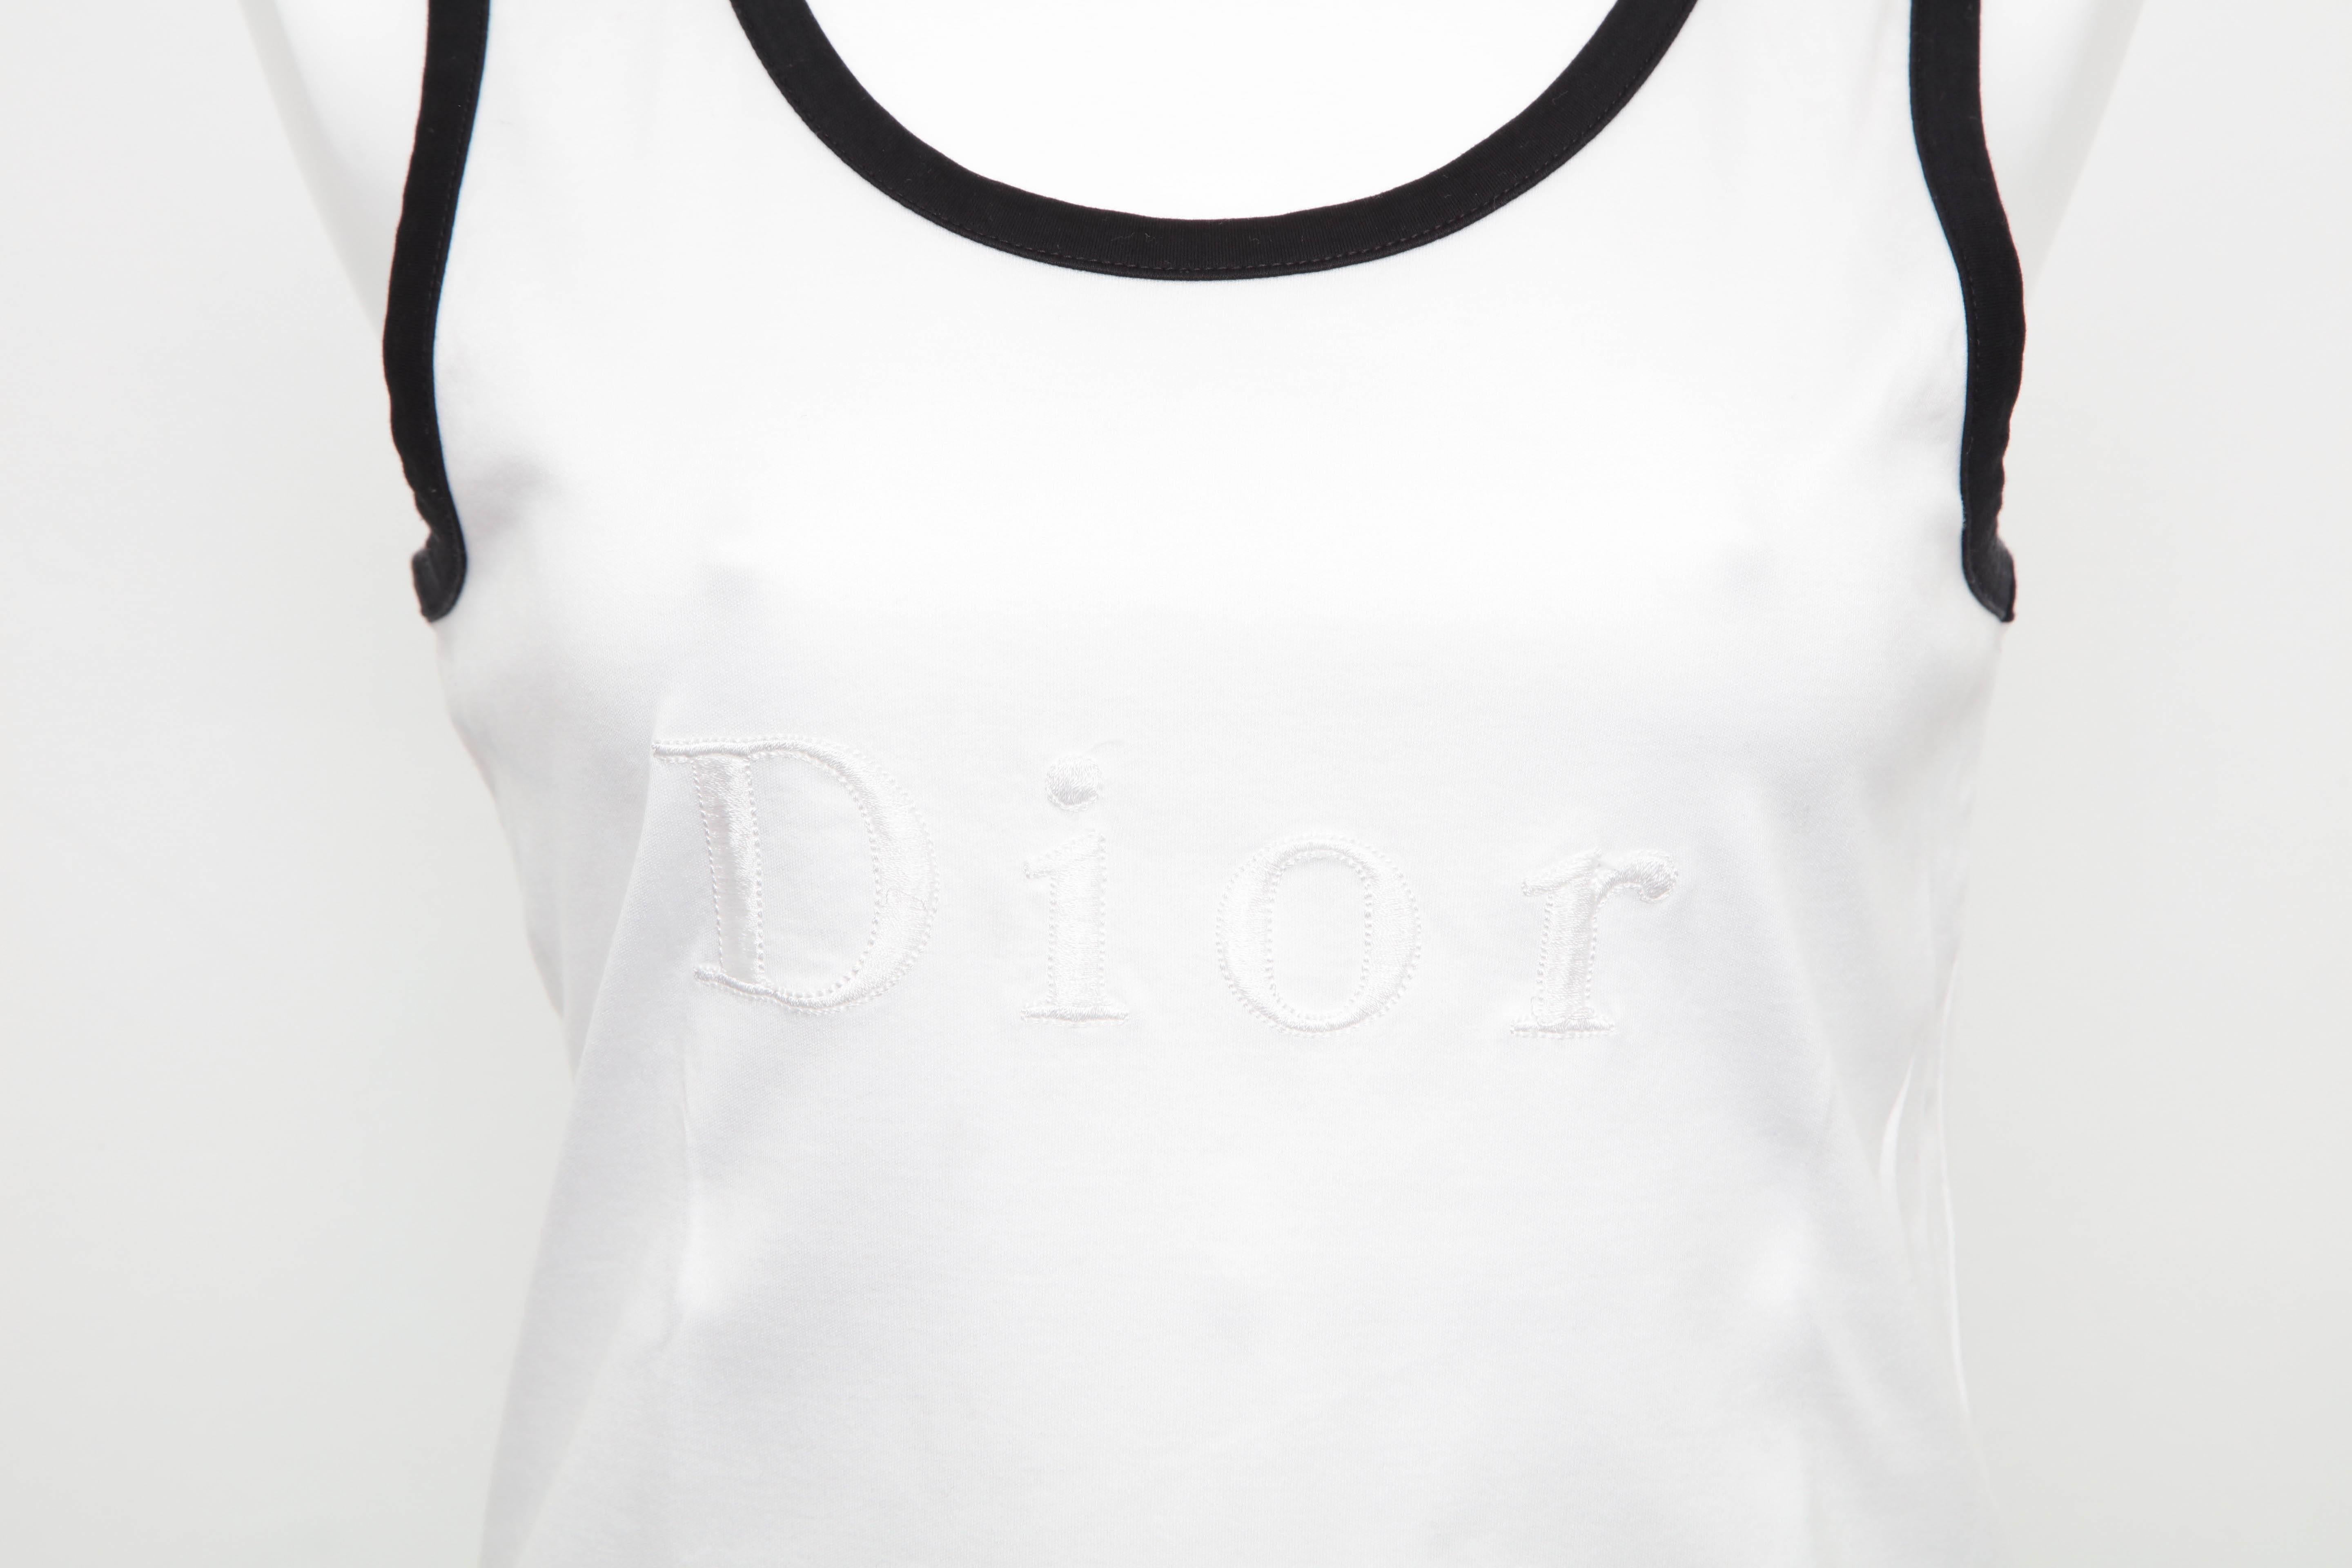 John Galliano for Christian Dior white logo tank top T-shirt.

Size L, could fit smaller 